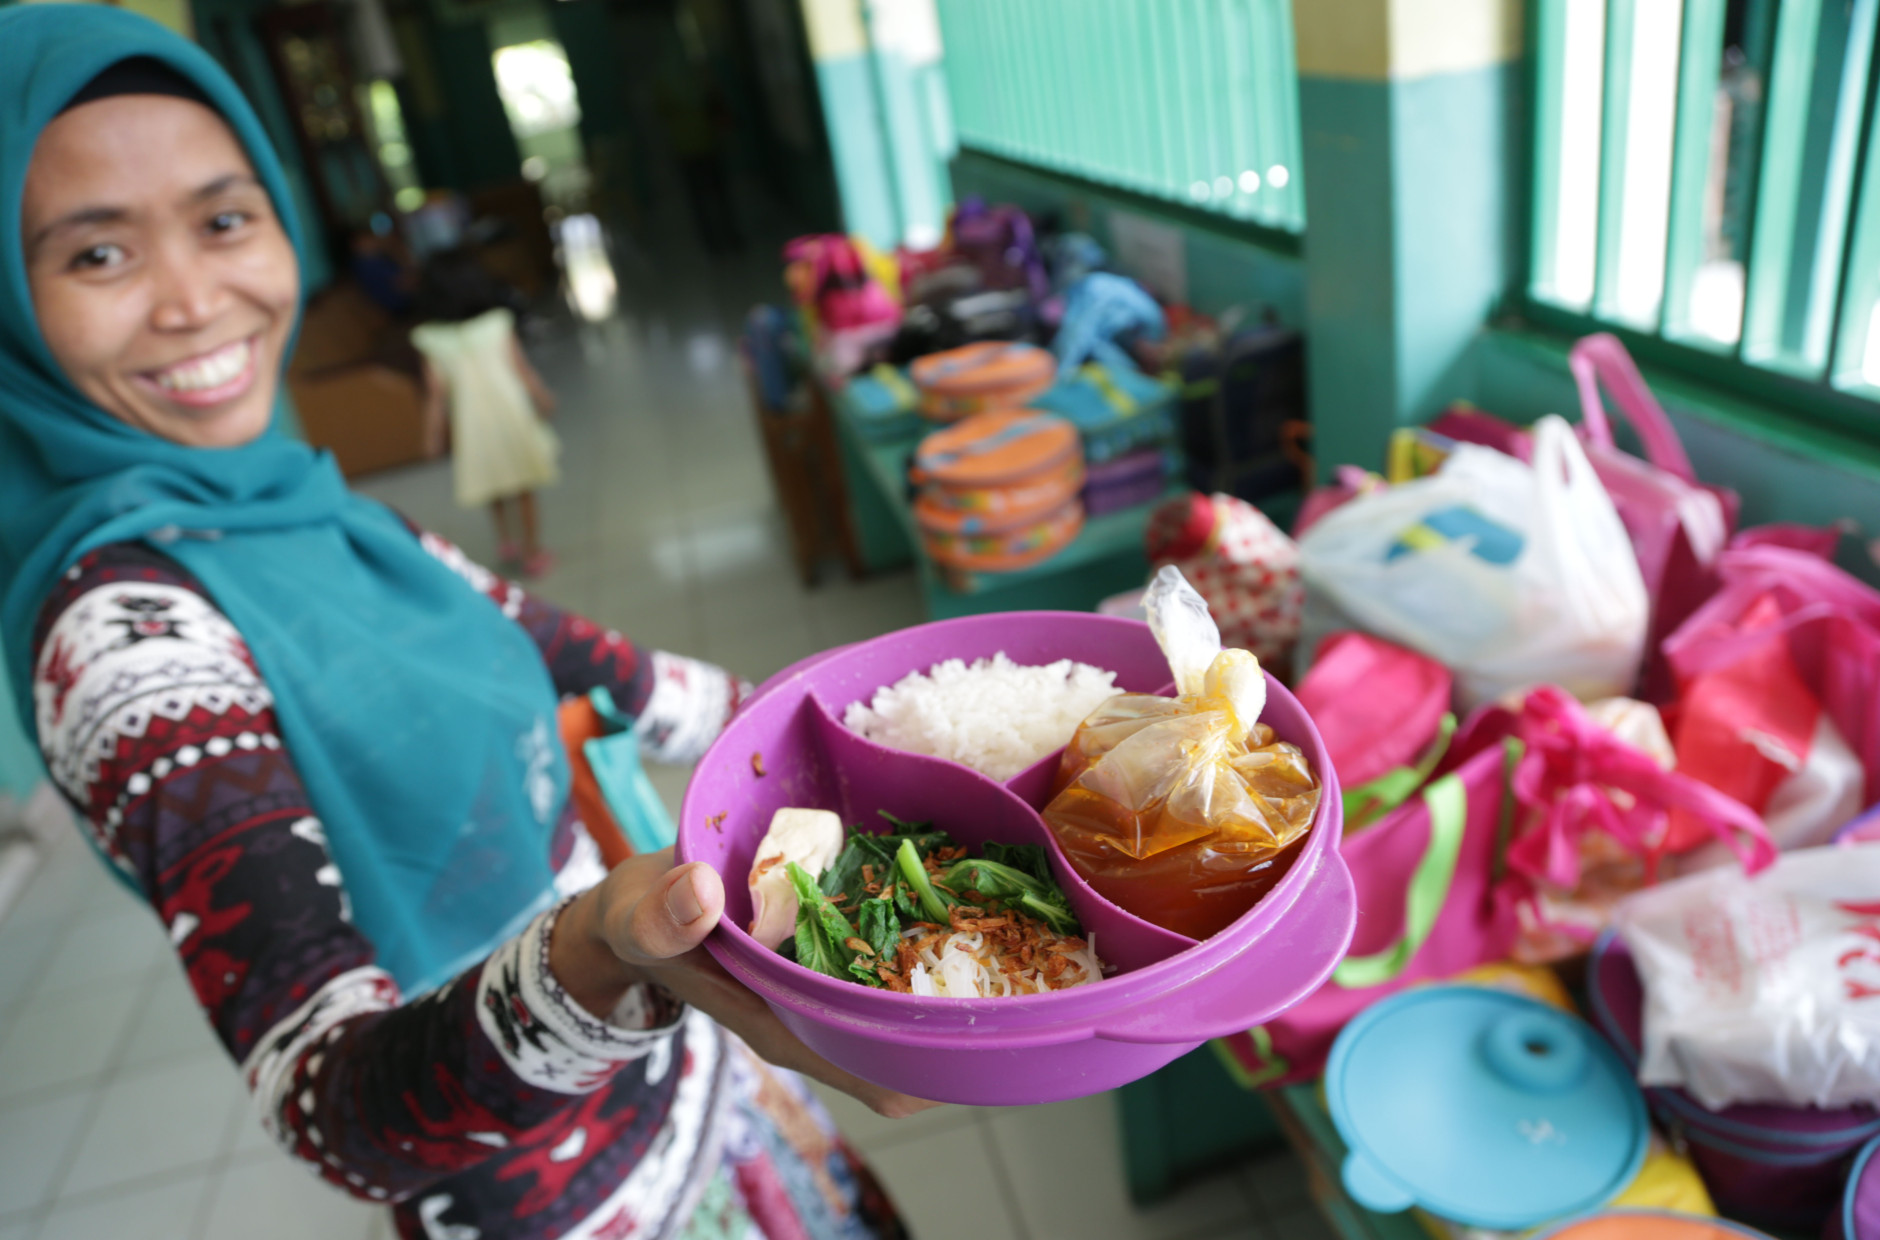 Sri, a house maid, shows a lunch box she prepared for her employer's child, at an elementary school in Jakarta, Indonesia, Tuesday, May 6, 2014. The lunch consists of rice, meatball soup, and tofu and vegetables. Most countries put a premium on feeding school children a healthy meal at lunchtime. The new American standards for school lunches are giving kids in the United States a taste of the good life already experienced by school children around the world. (AP Photo/Achmad Ibrahim)